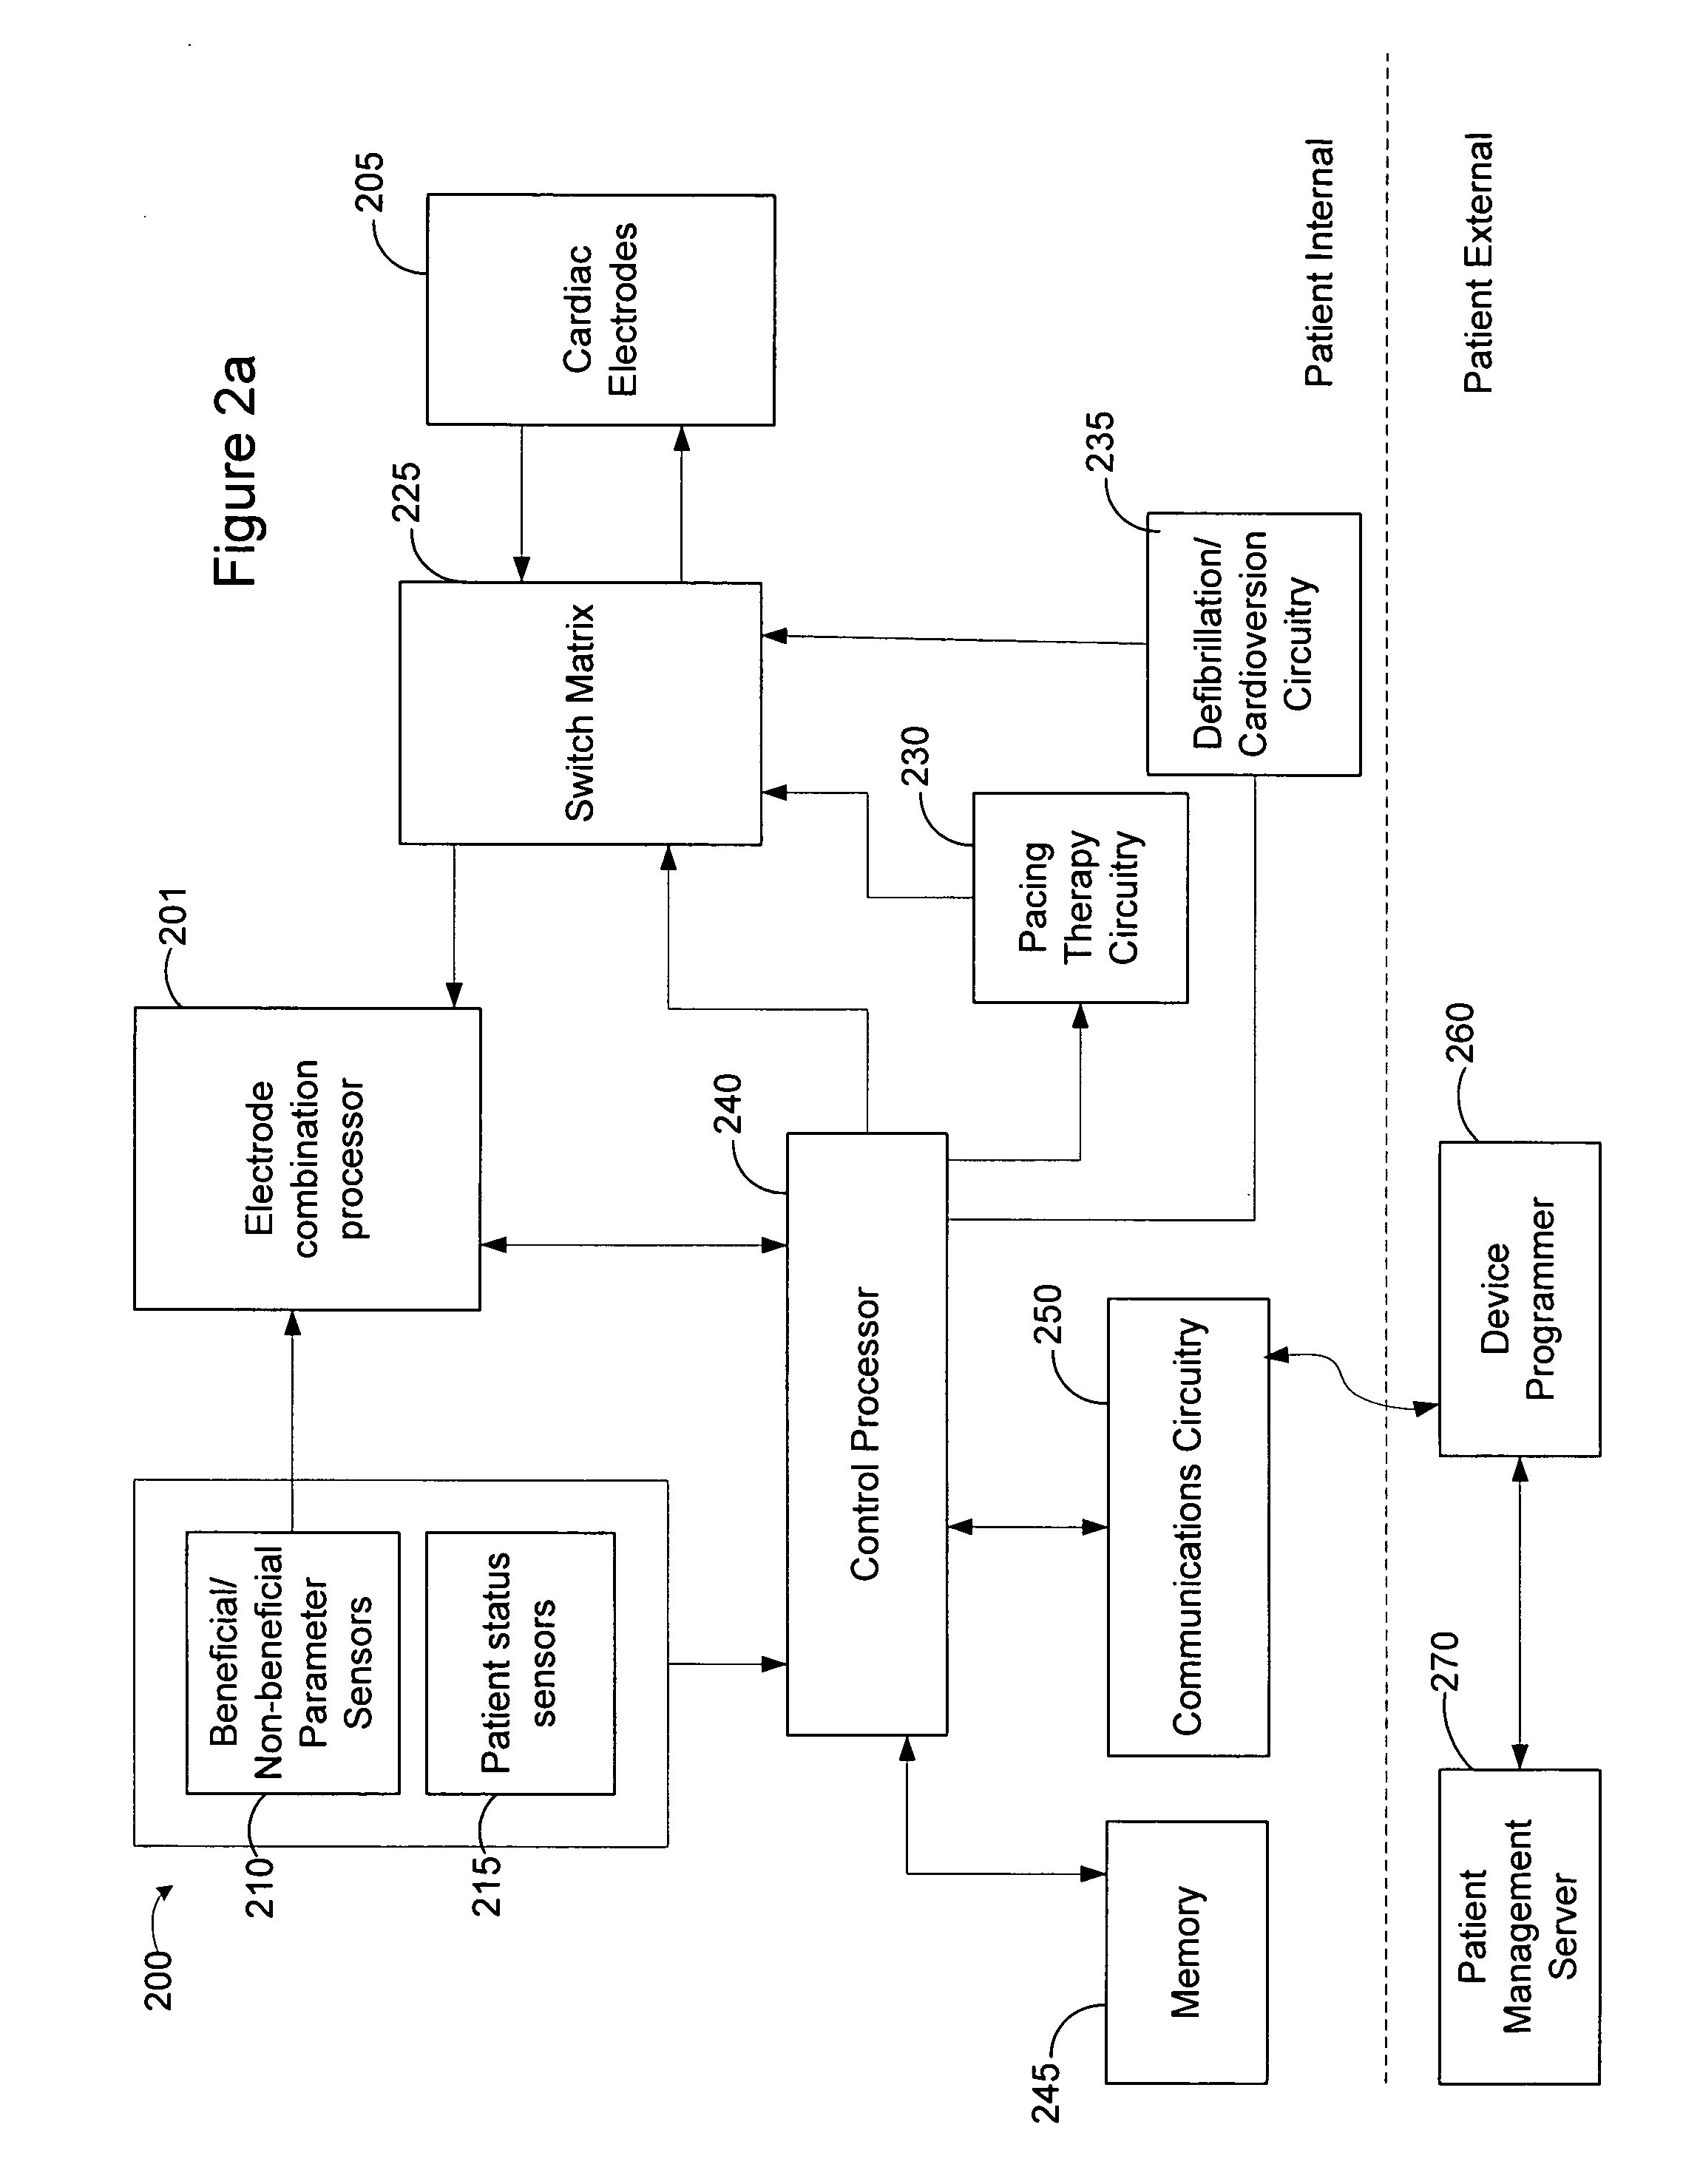 Method and apparatus to perform electrode combination selection